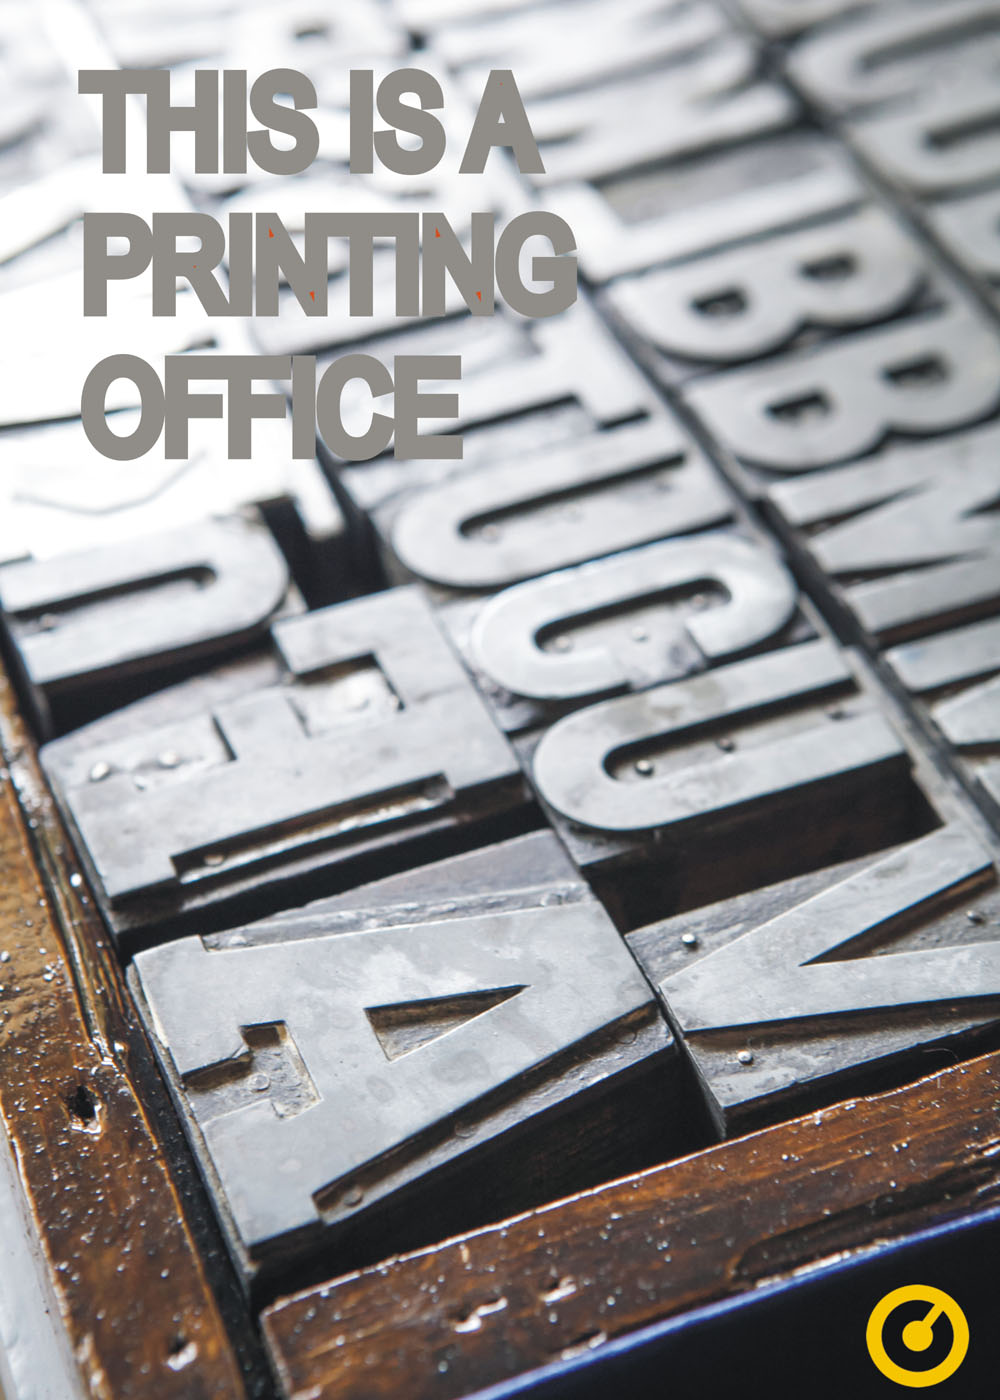 This is a printing office